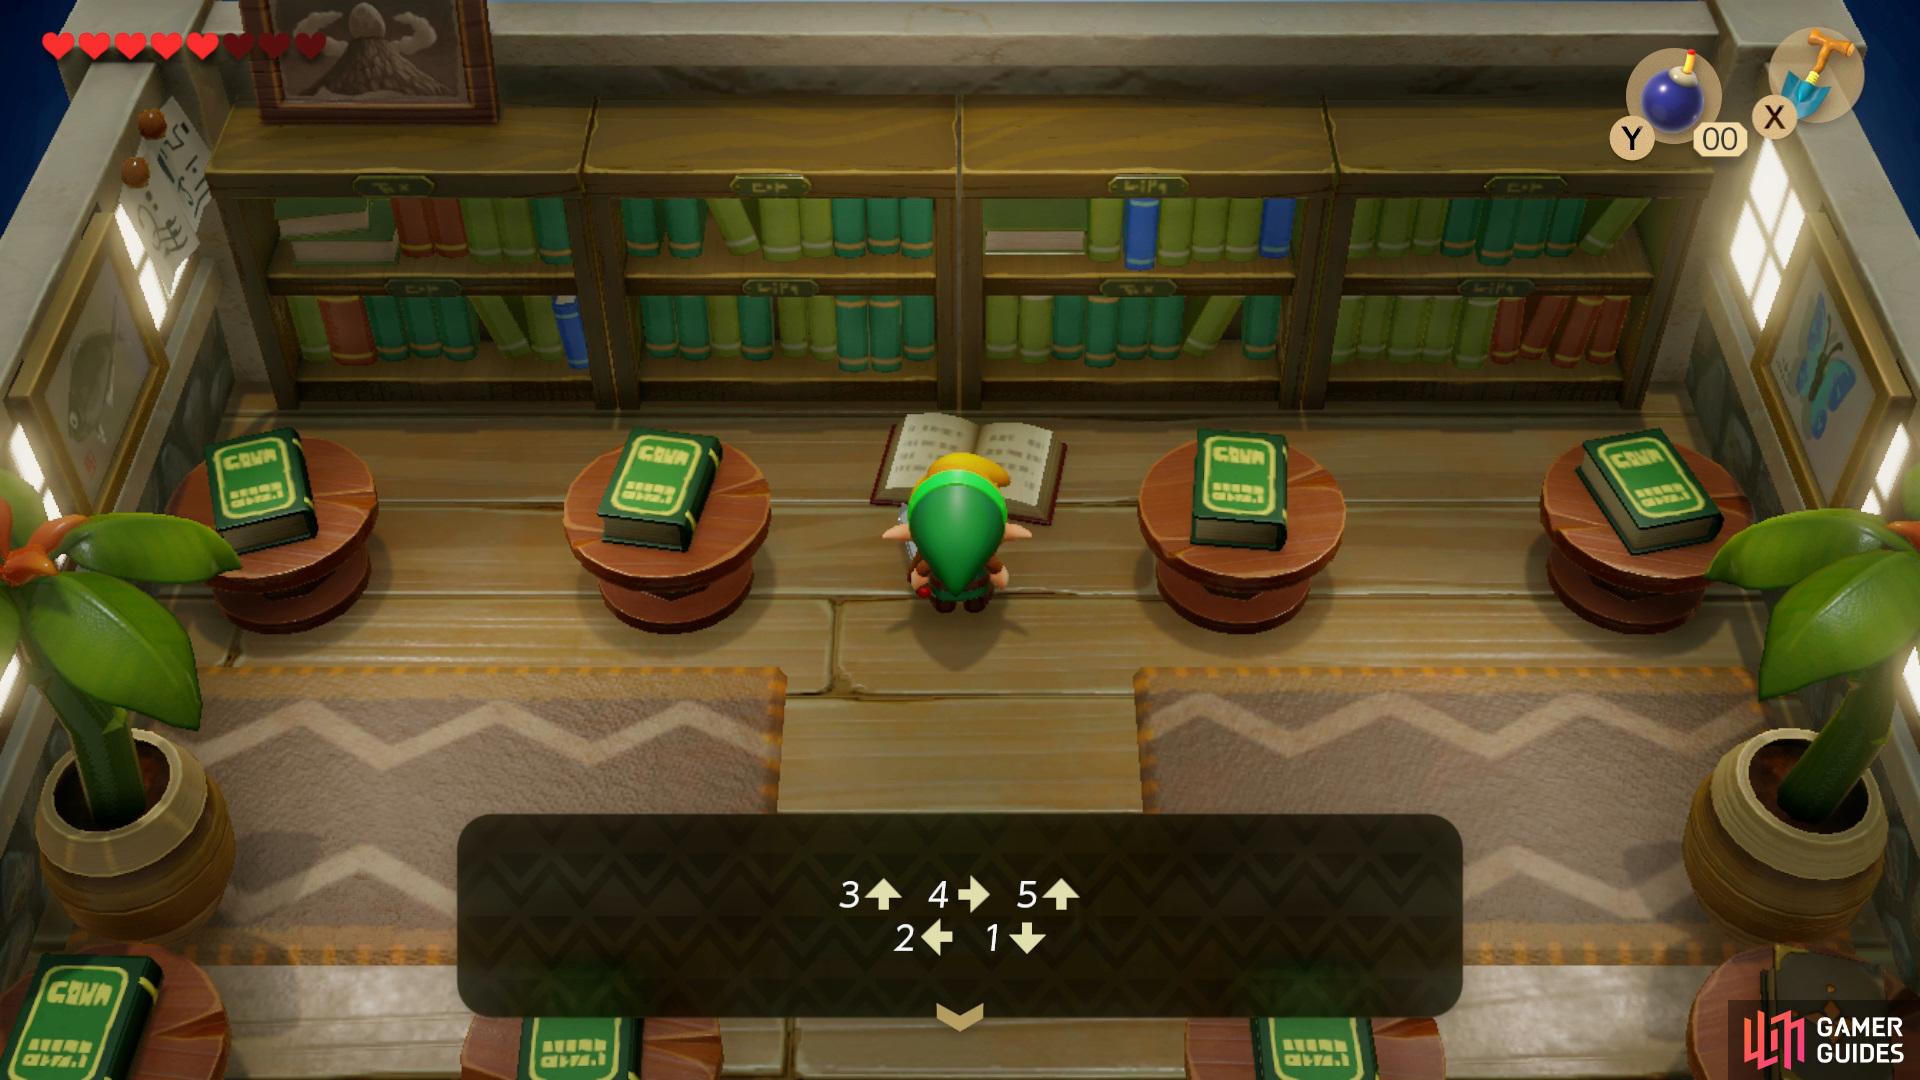 Sprint into the bookshelf to cause a book to fall, inside holds the code to the Color Dungeon.